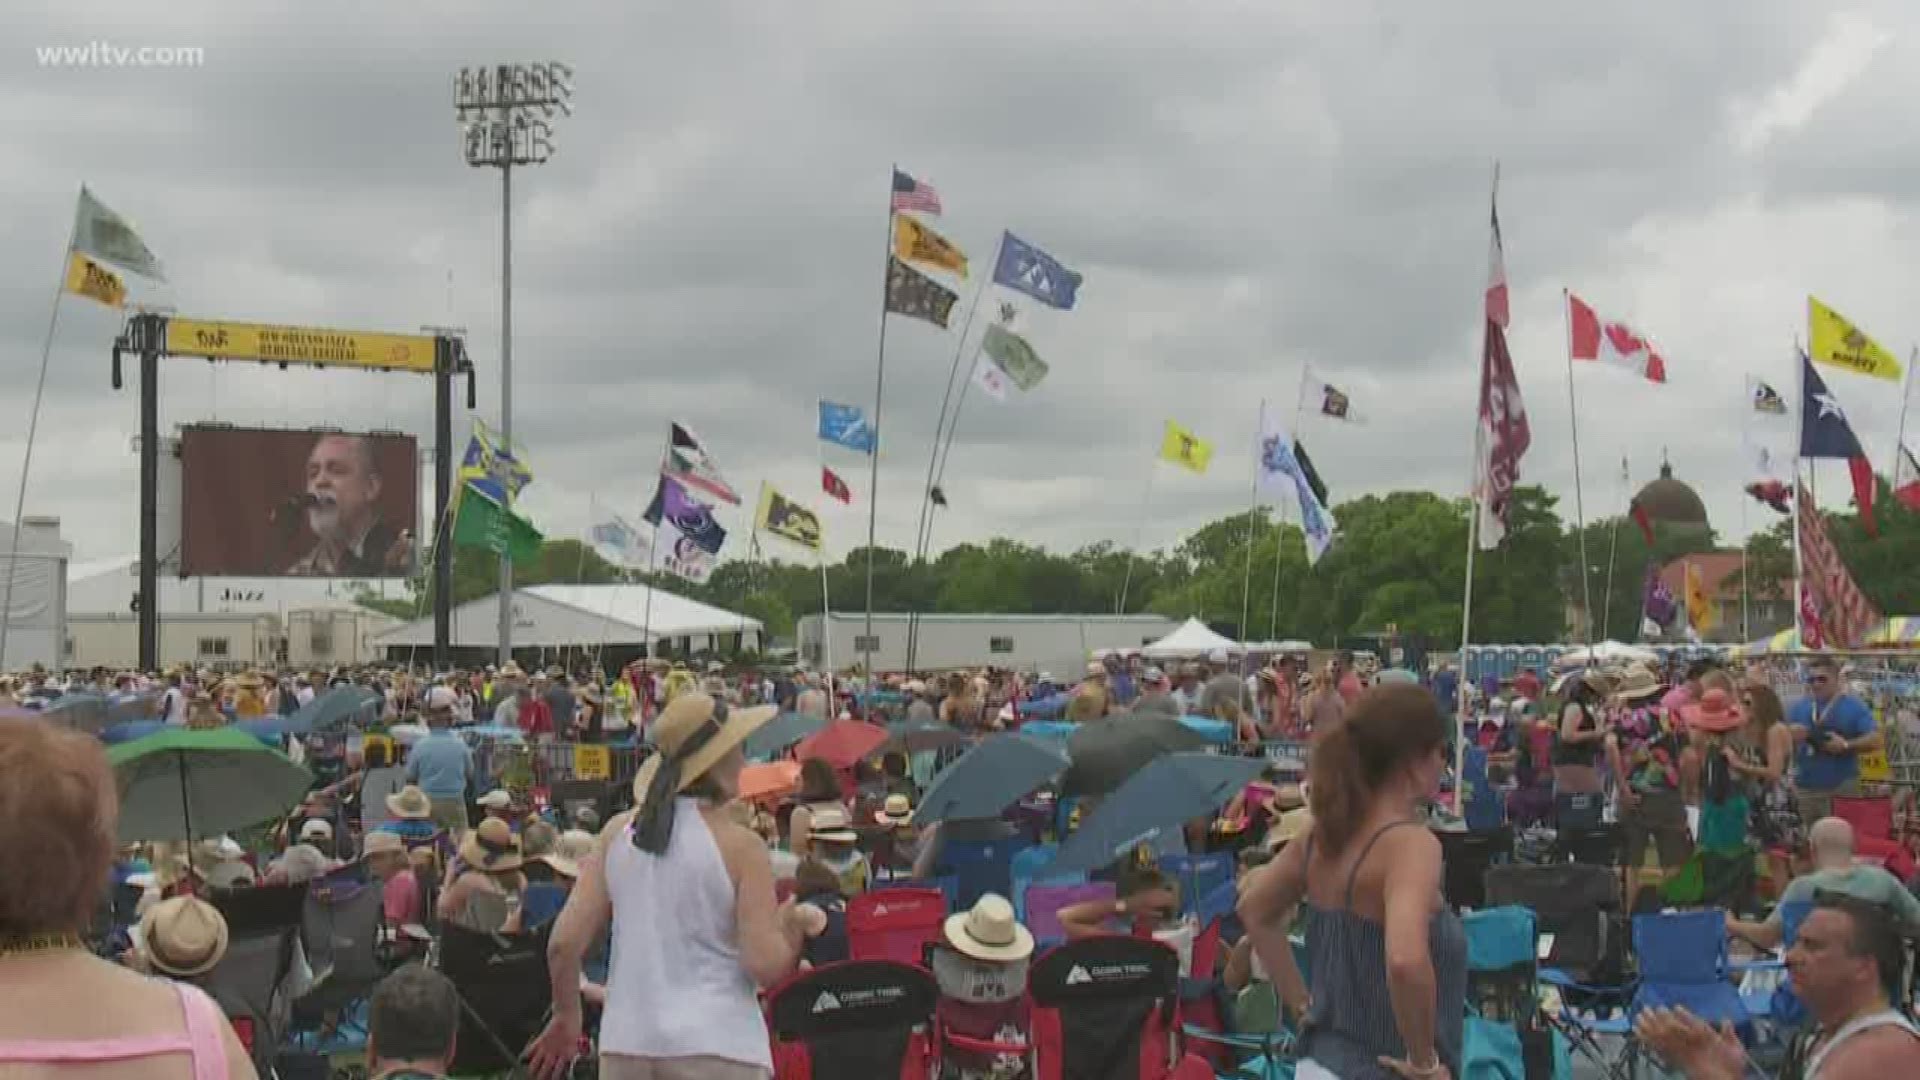 "Bringing a flag to the fest is the most important thing in Jazz Fest, so your whole group can find you," one woman said.